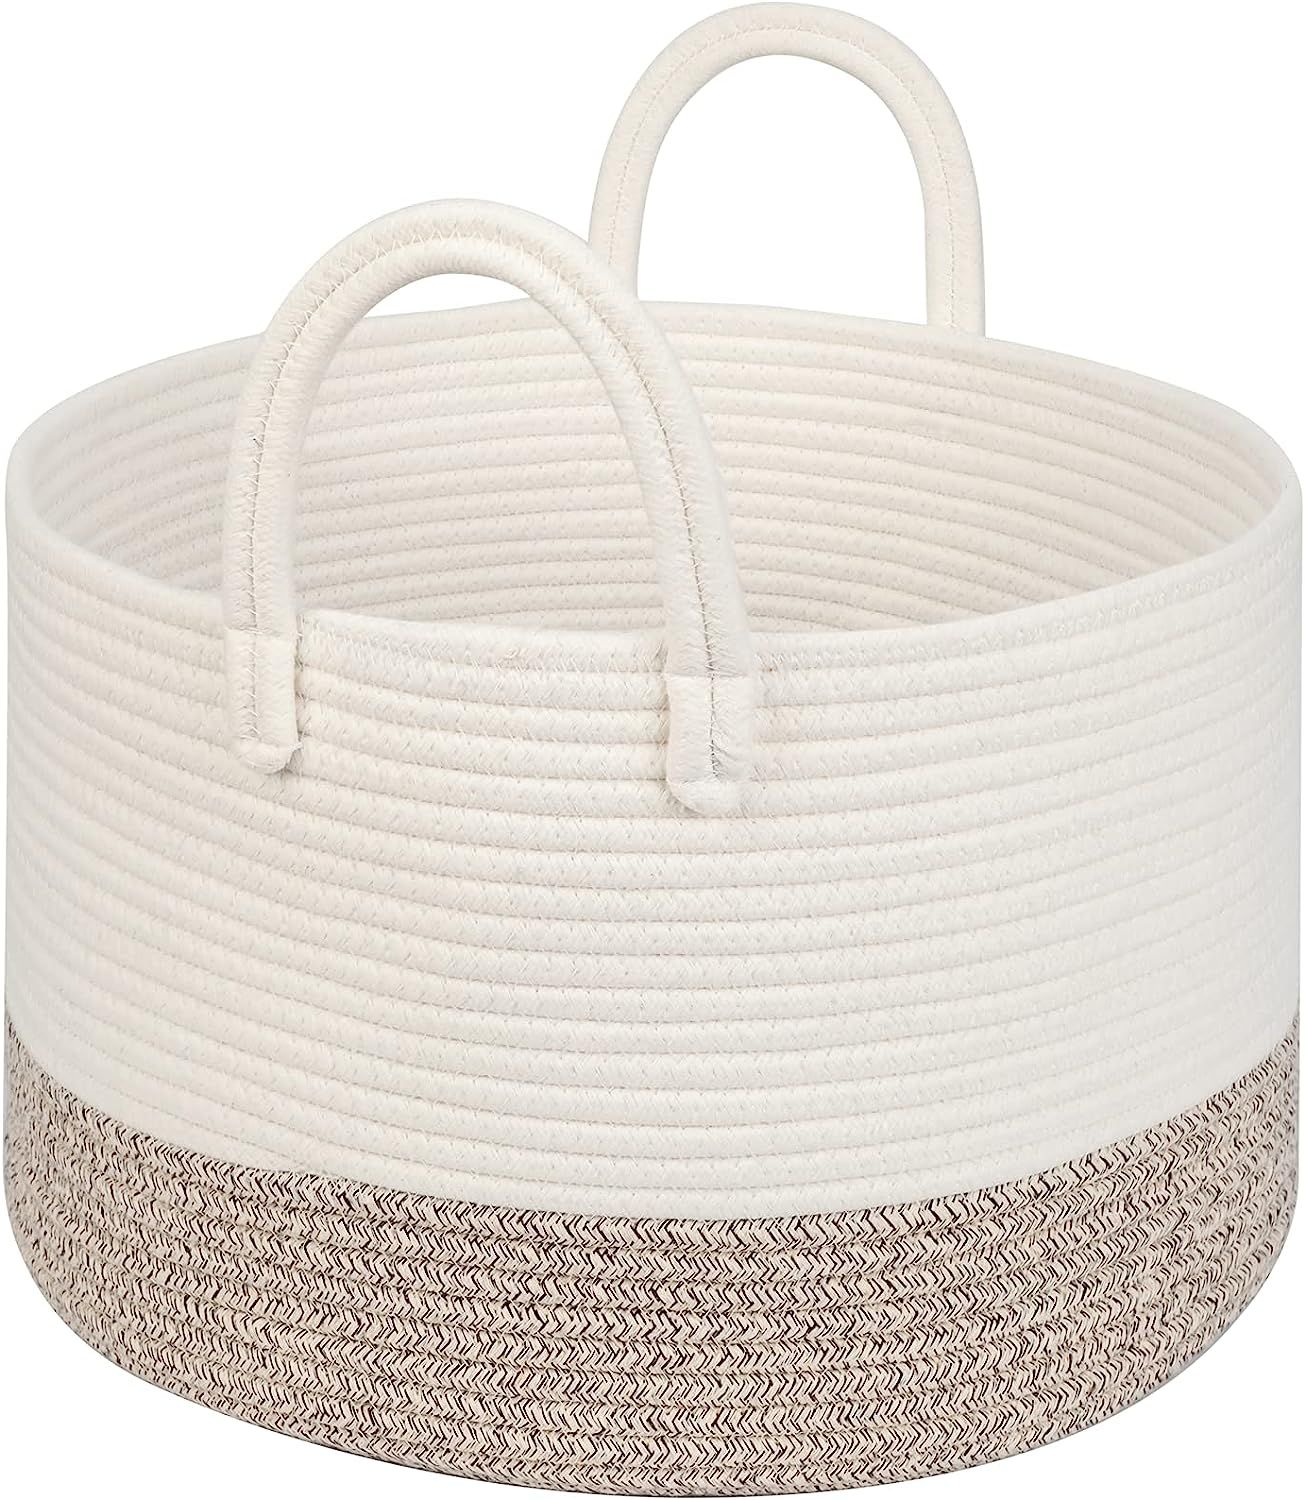 DOKEHOM Large Storage Baskets -15.7(D) x 9.8(H) Inches- Cotton Rope Basket Woven Baby Laundry Bas... | Amazon (CA)